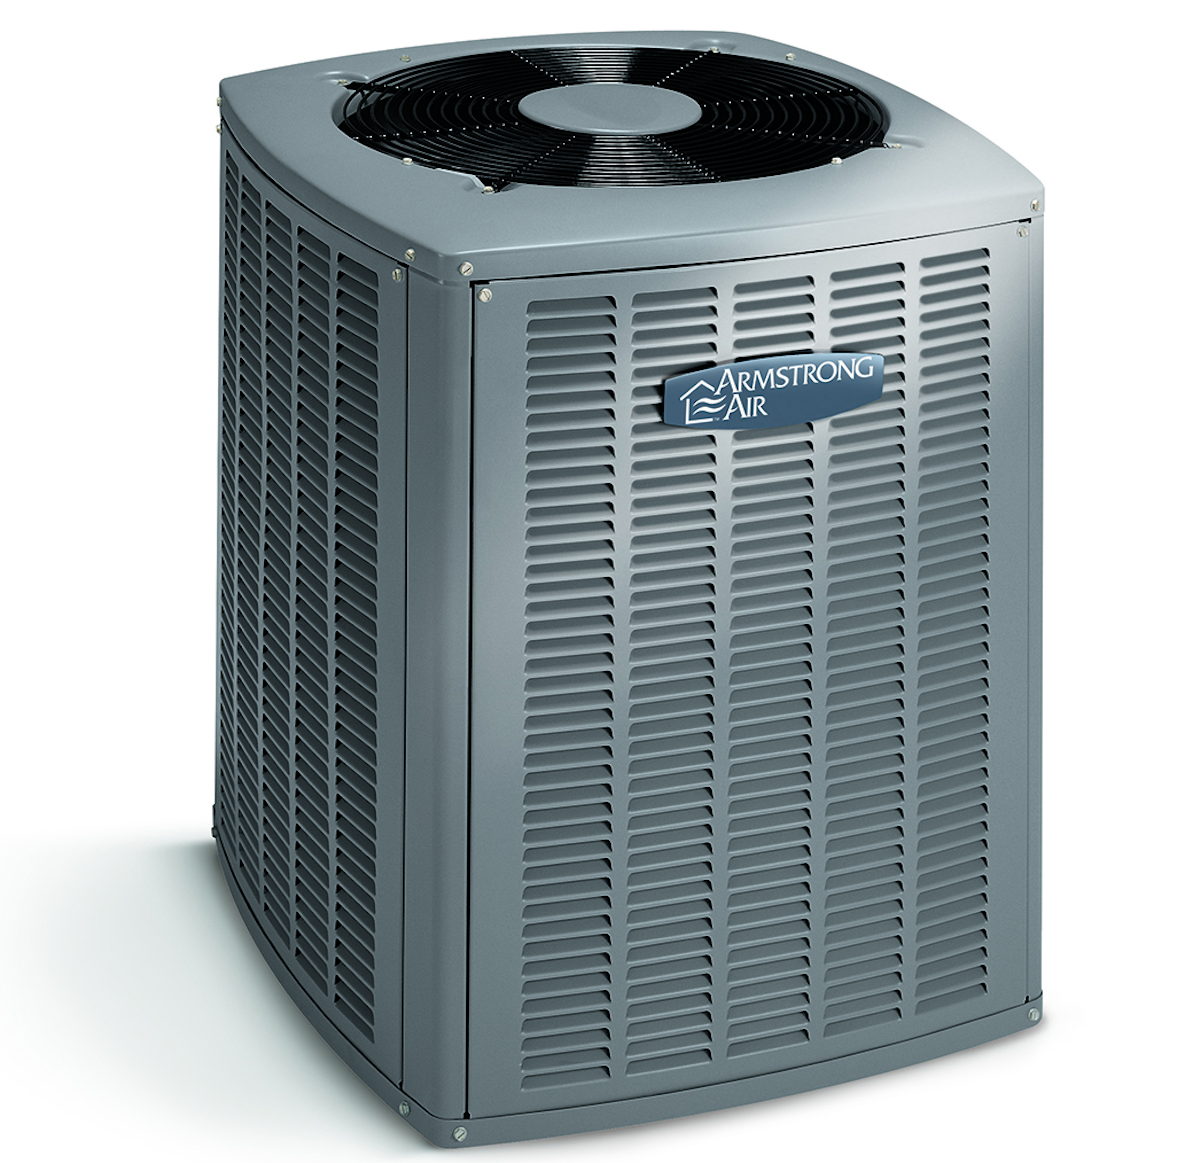 armstrong-air-introduces-14-seer-5-ton-air-conditioner-contracting